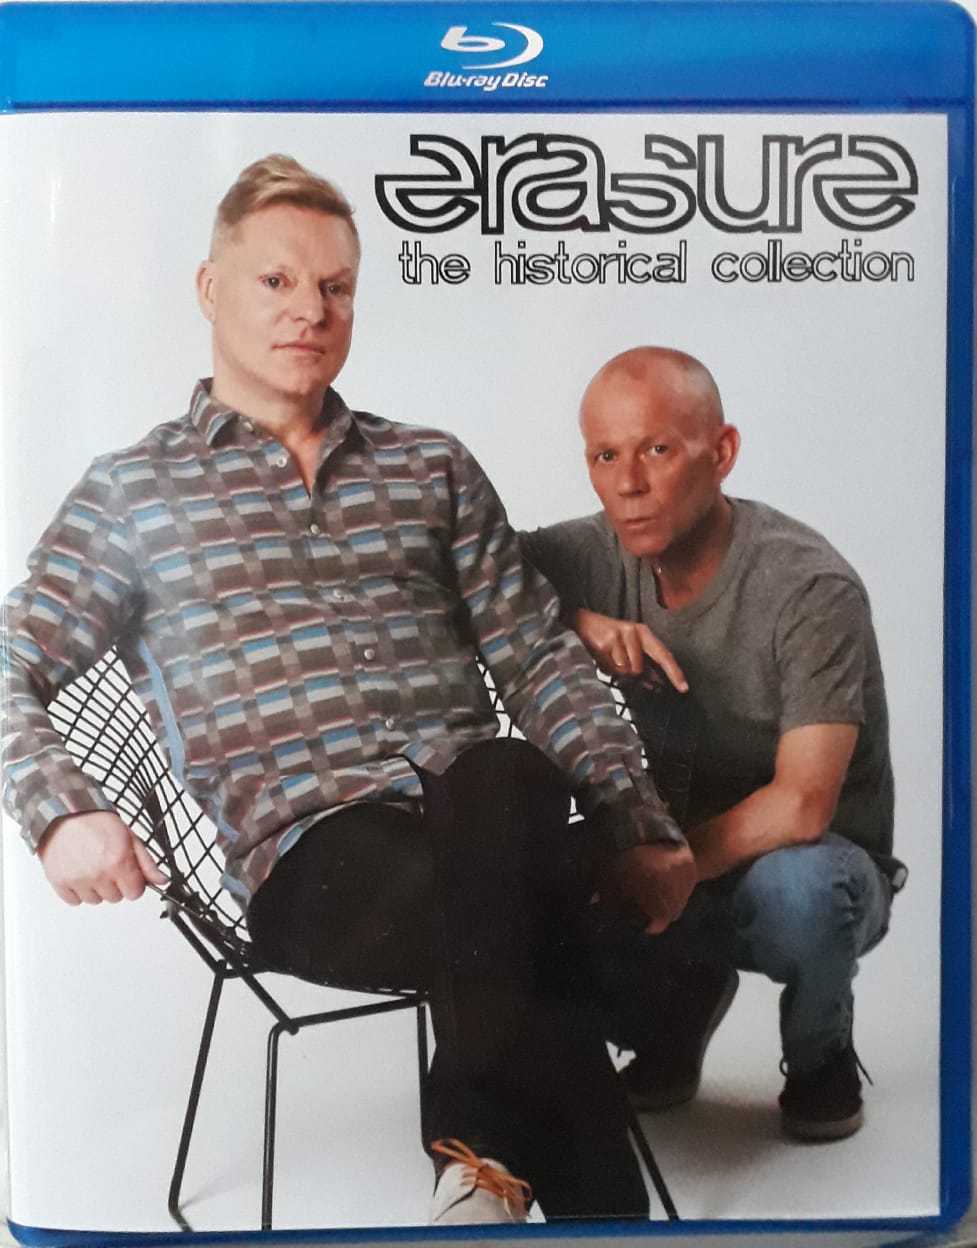 Primary image for Erasure The Historical Collection 2x Double Blu-ray Discs (Videography) (Bluray)